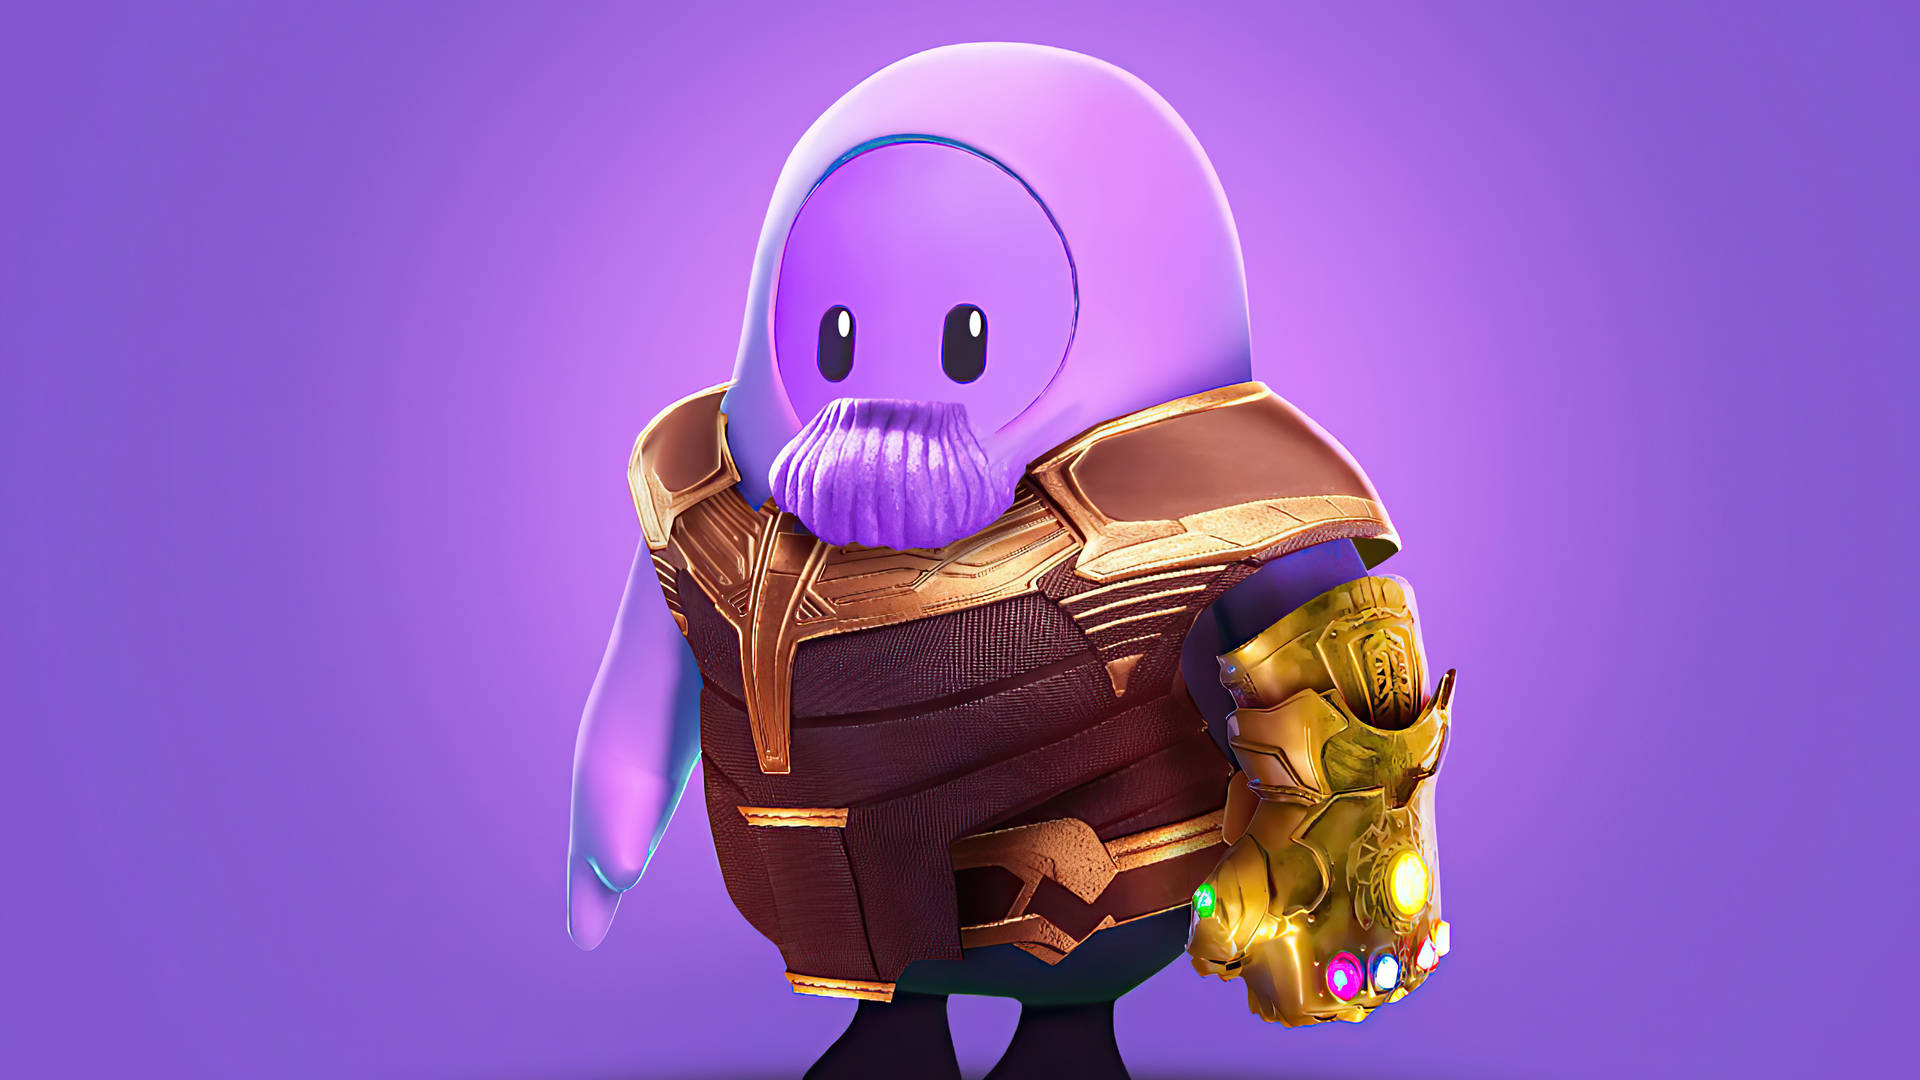 Fall Guys Ultimate Knockout Thanos Skin Wallpaper